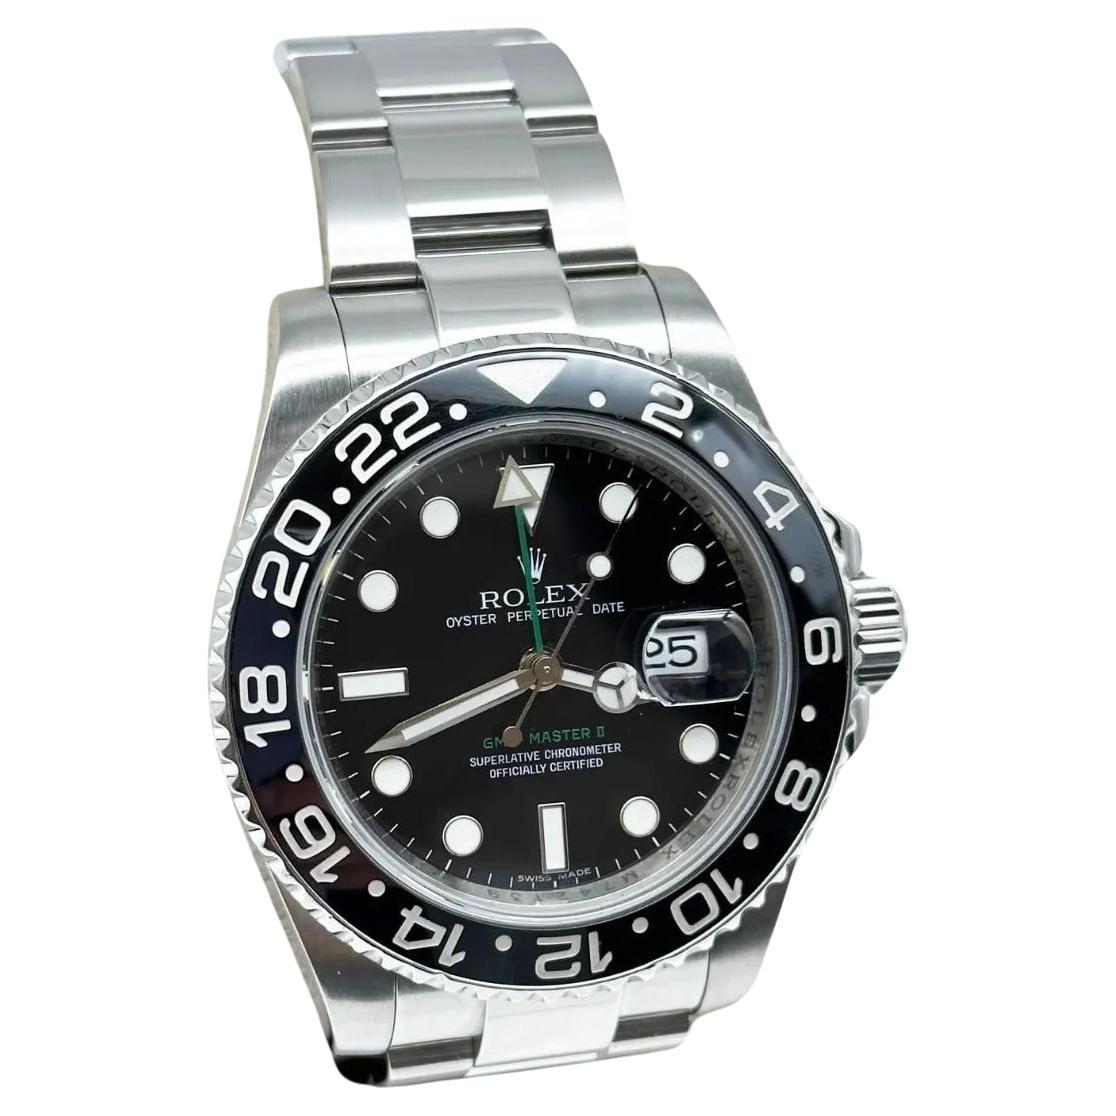 Rolex GMT Master II 116710 Black Ceramic Stainless Steel For Sale